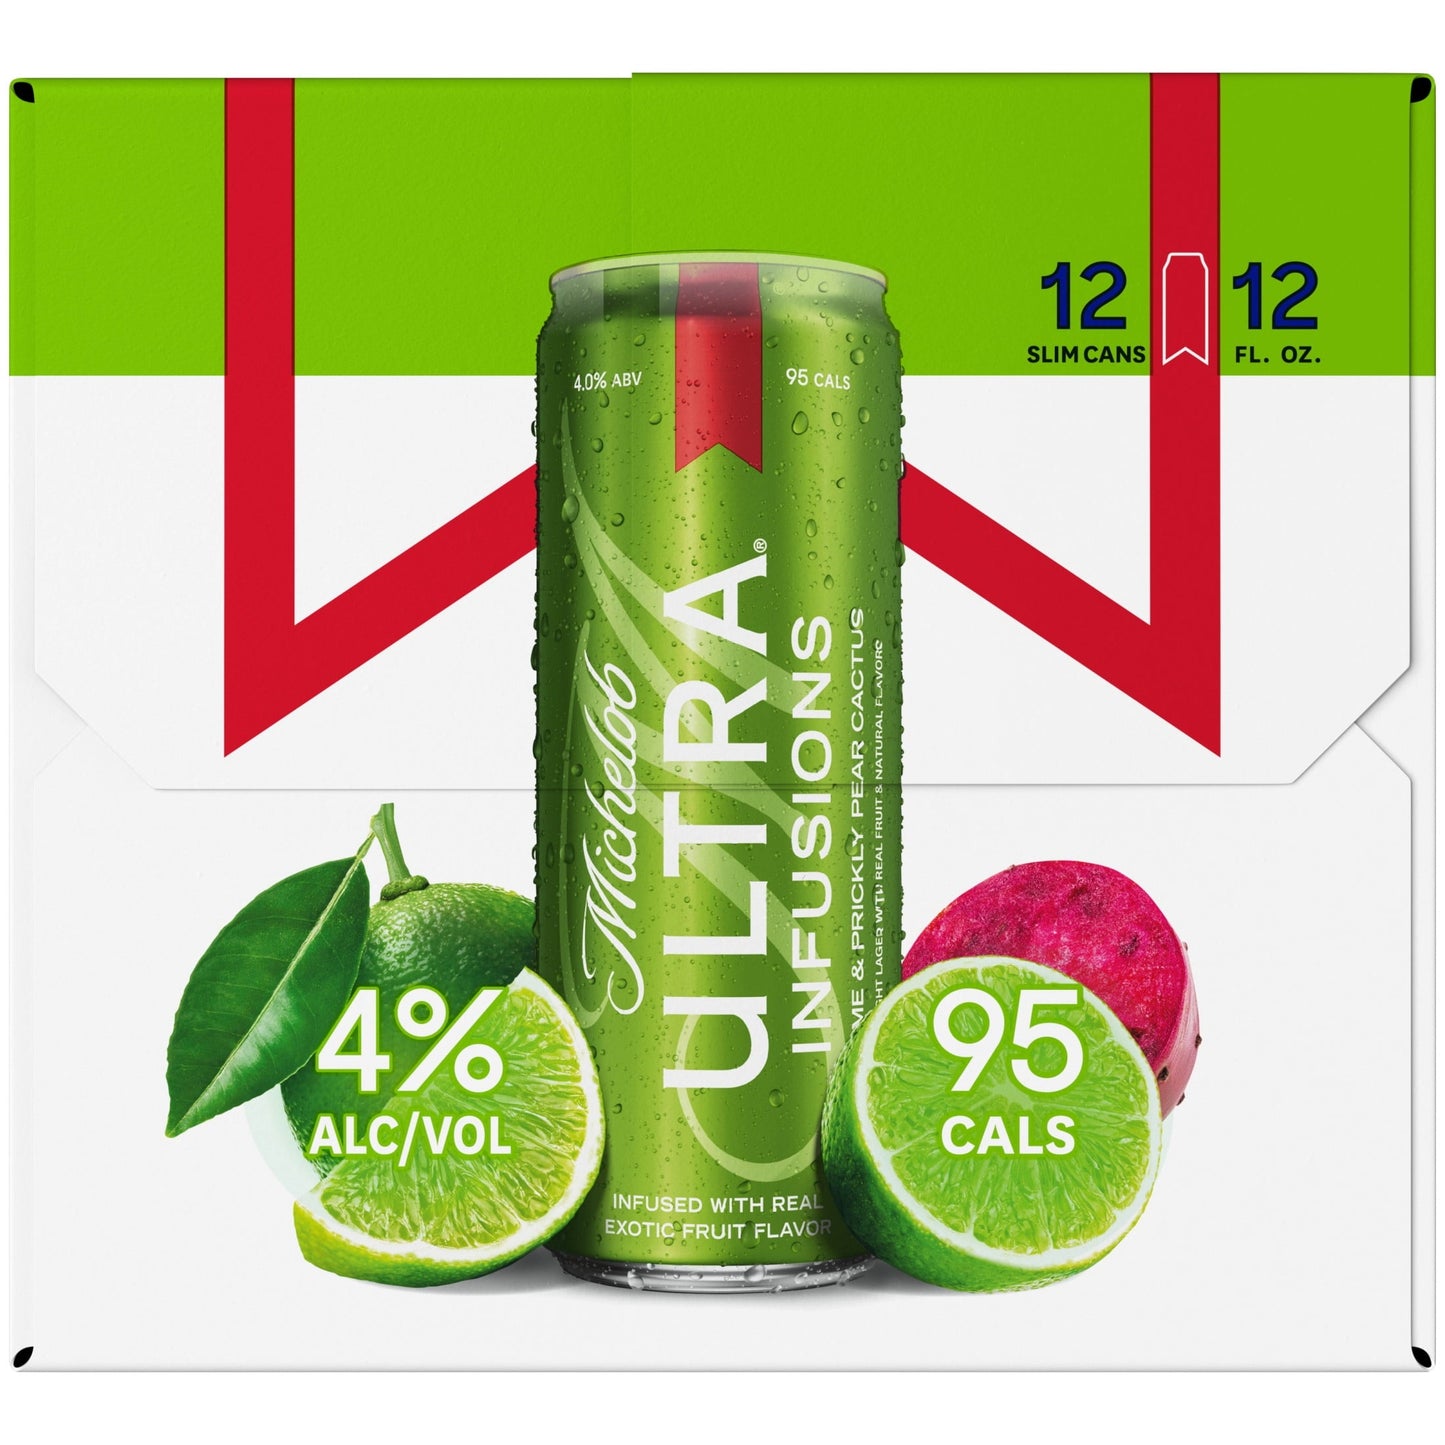 Michelob Ultra Infusions Lime & Prickly Pear Cactus Beer 12 Pack, 12 fl oz Cans, 4% ABV, Domestic